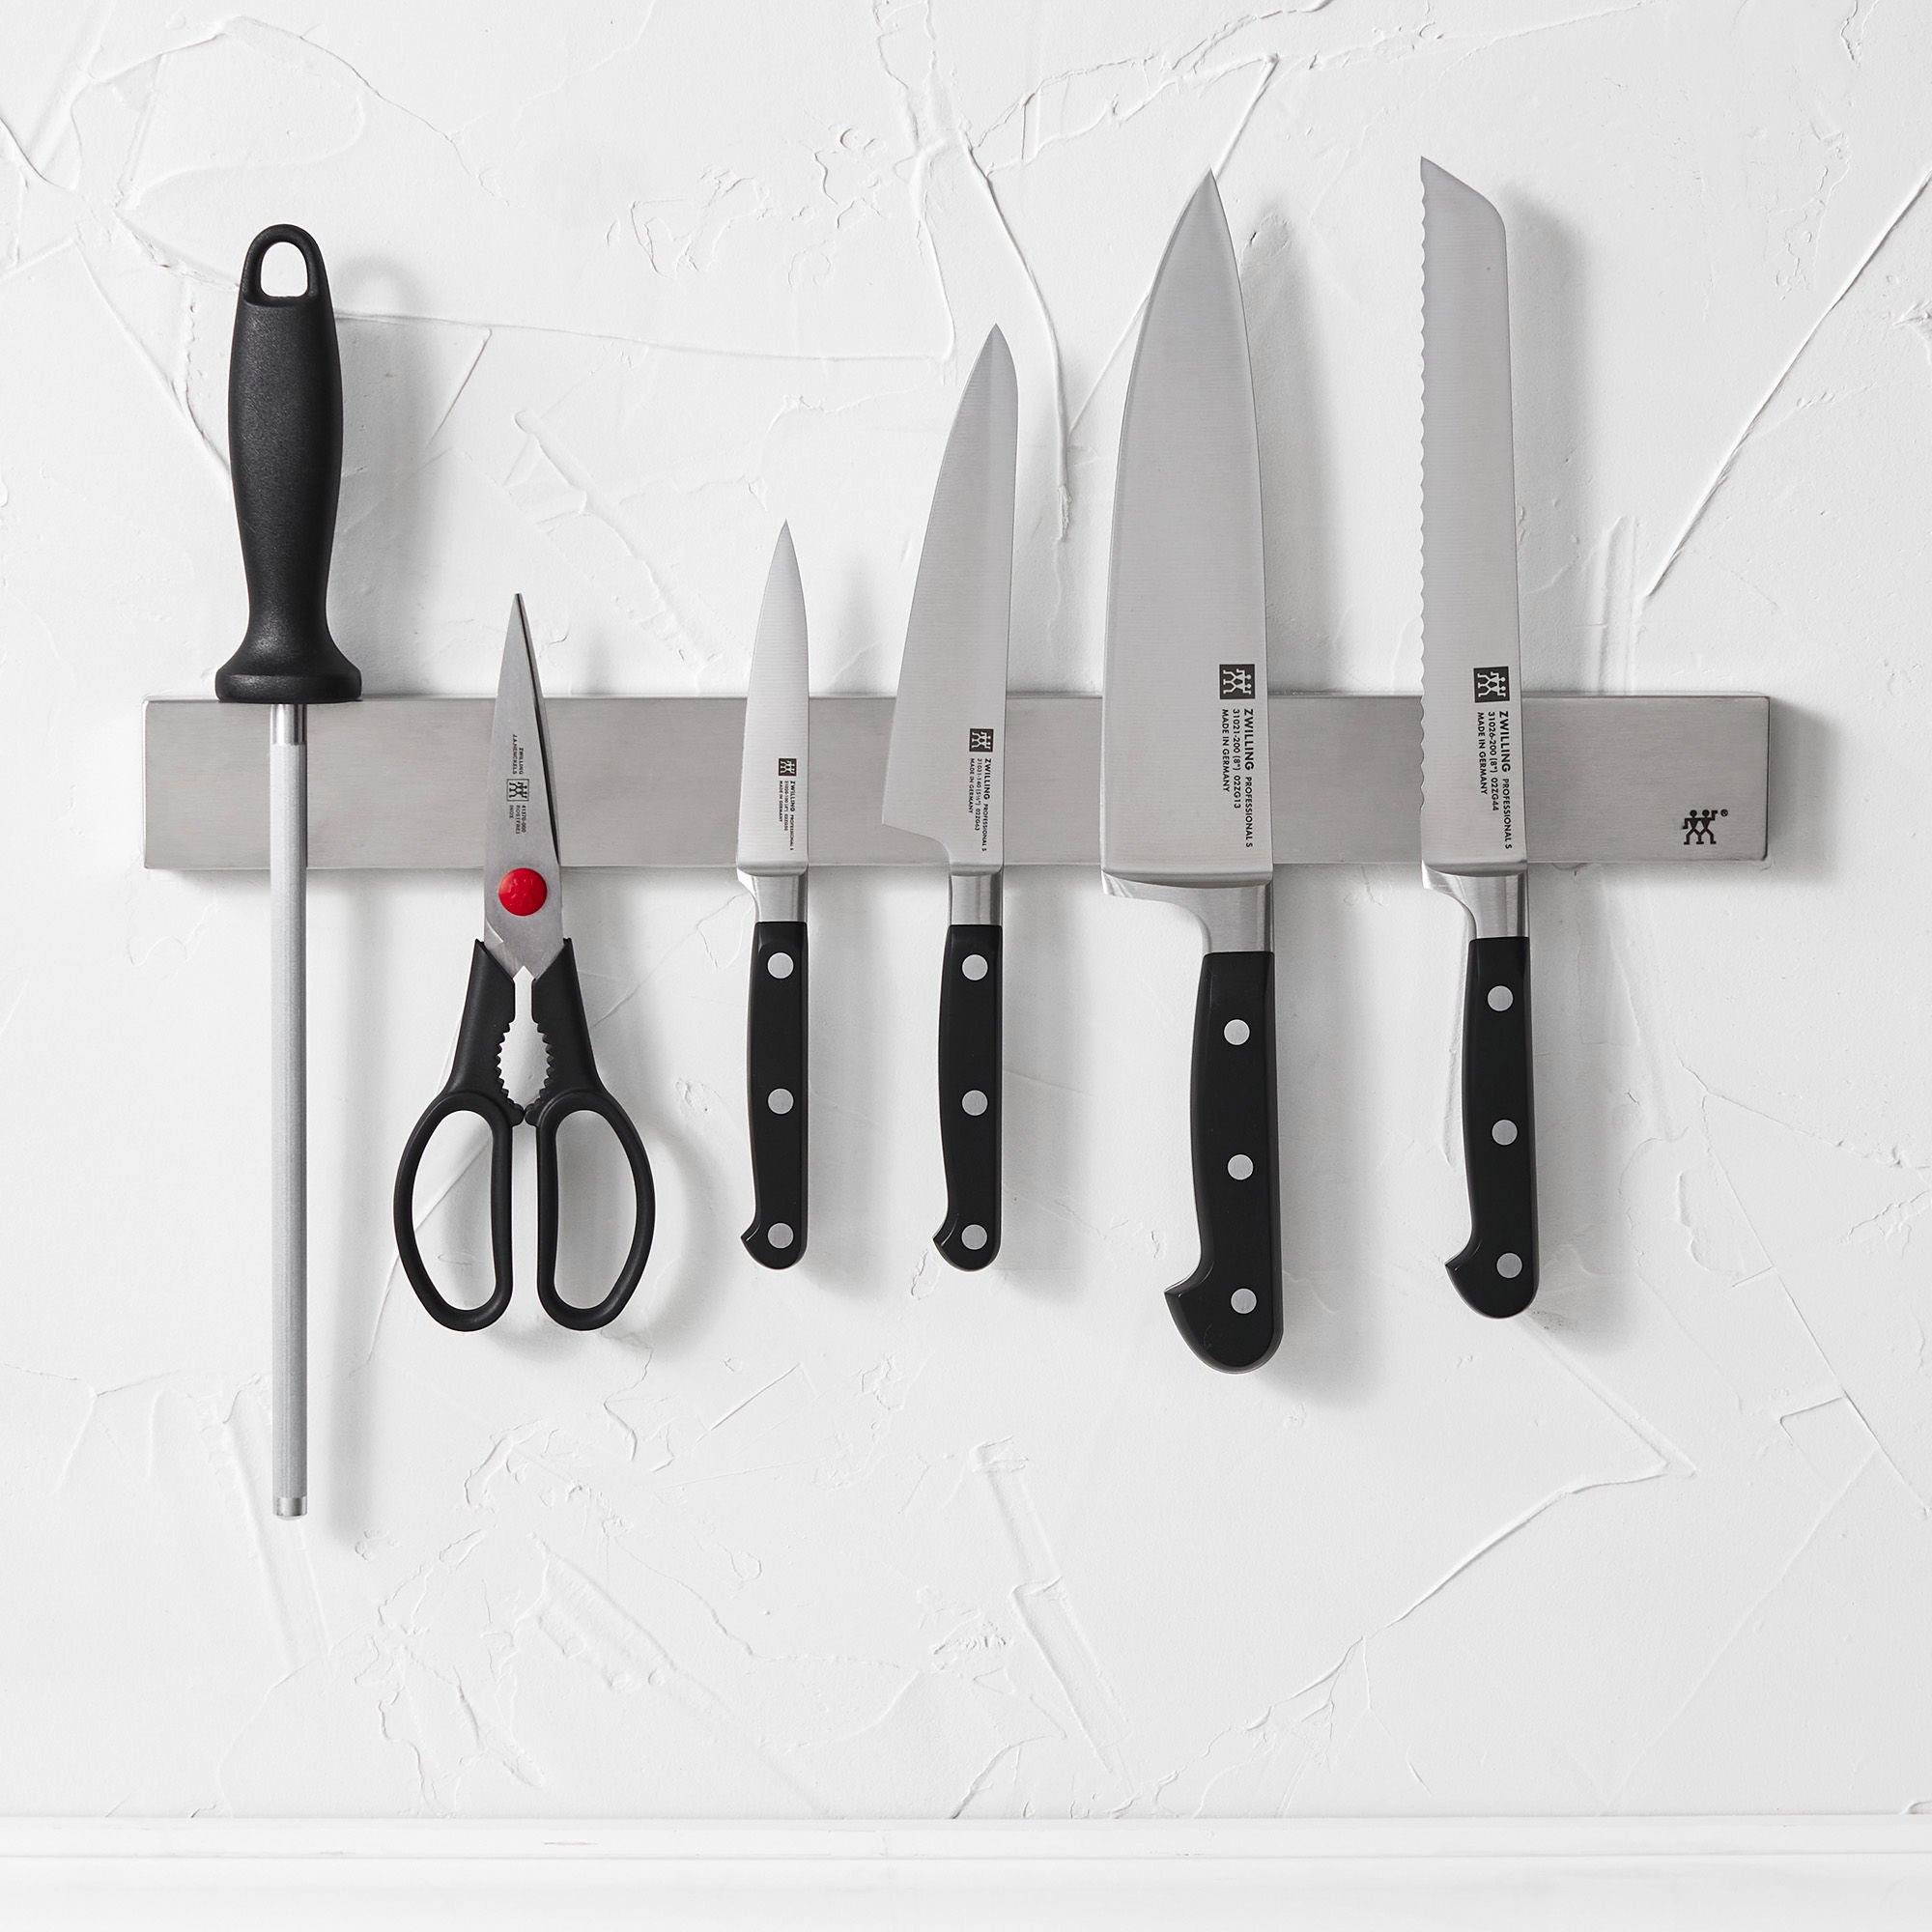 https://www.zwilling.com/on/demandware.static/-/Sites-zwilling-master-catalog/default/dwc8dac15a/images/large/750033394.jpg